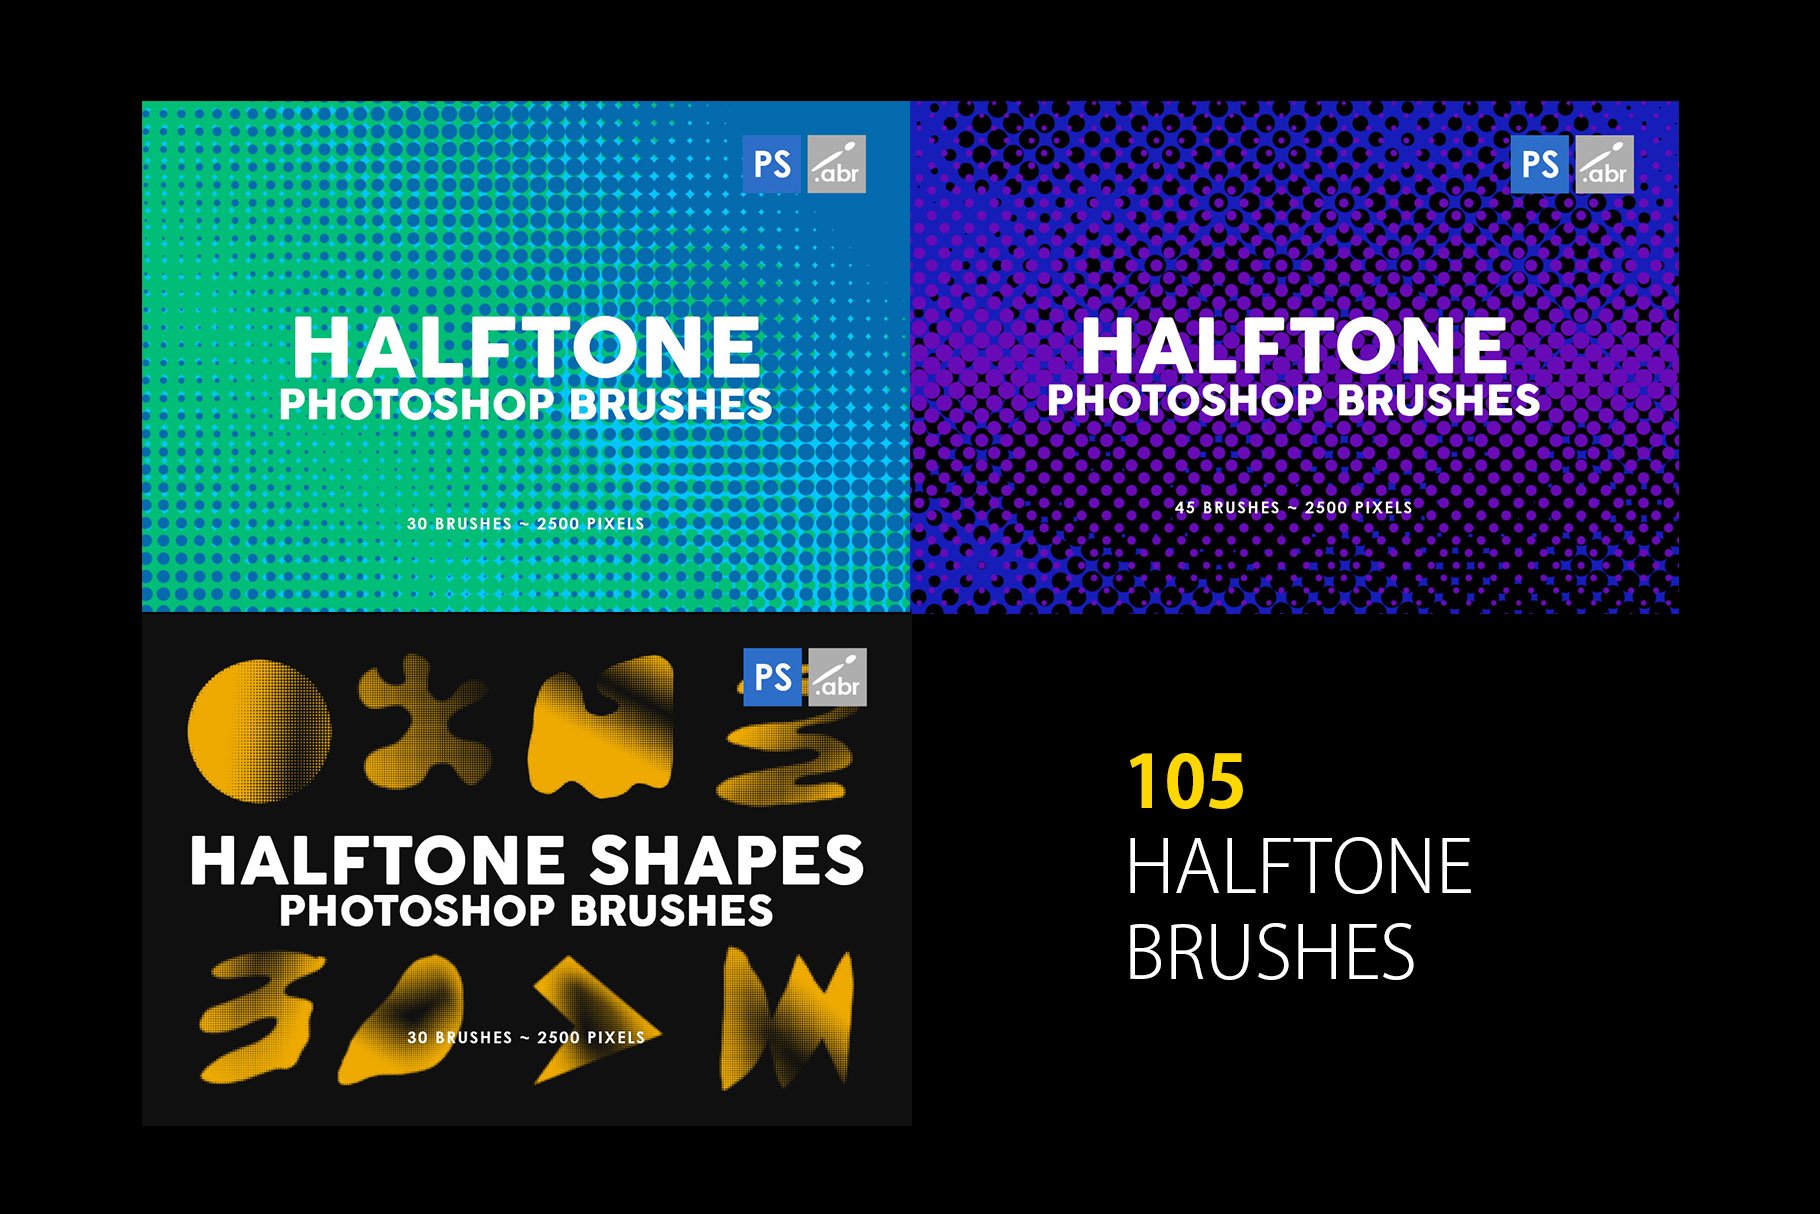 halftone brushes preview 956